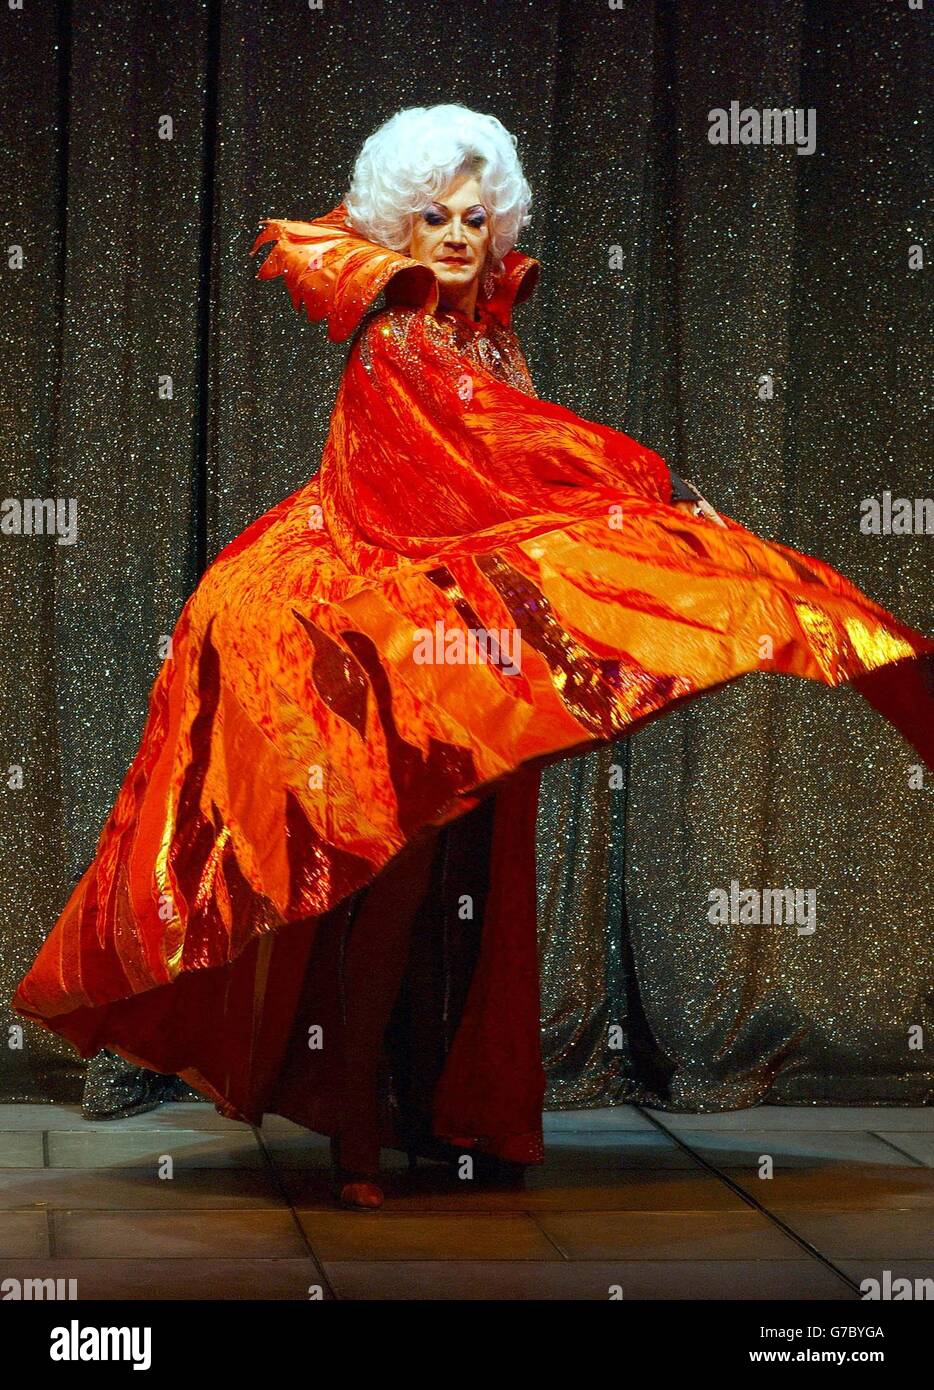 Lily Savage as the Wicked Queen poses for photographers on stage during a photocall for Snow White and the Seven Dwarfs at the Victoria Palace Theatre in London. The family pantomime runs at the theatre for only 50 performances from Friday 17 December to Sunday 23 January 2005. Stock Photo